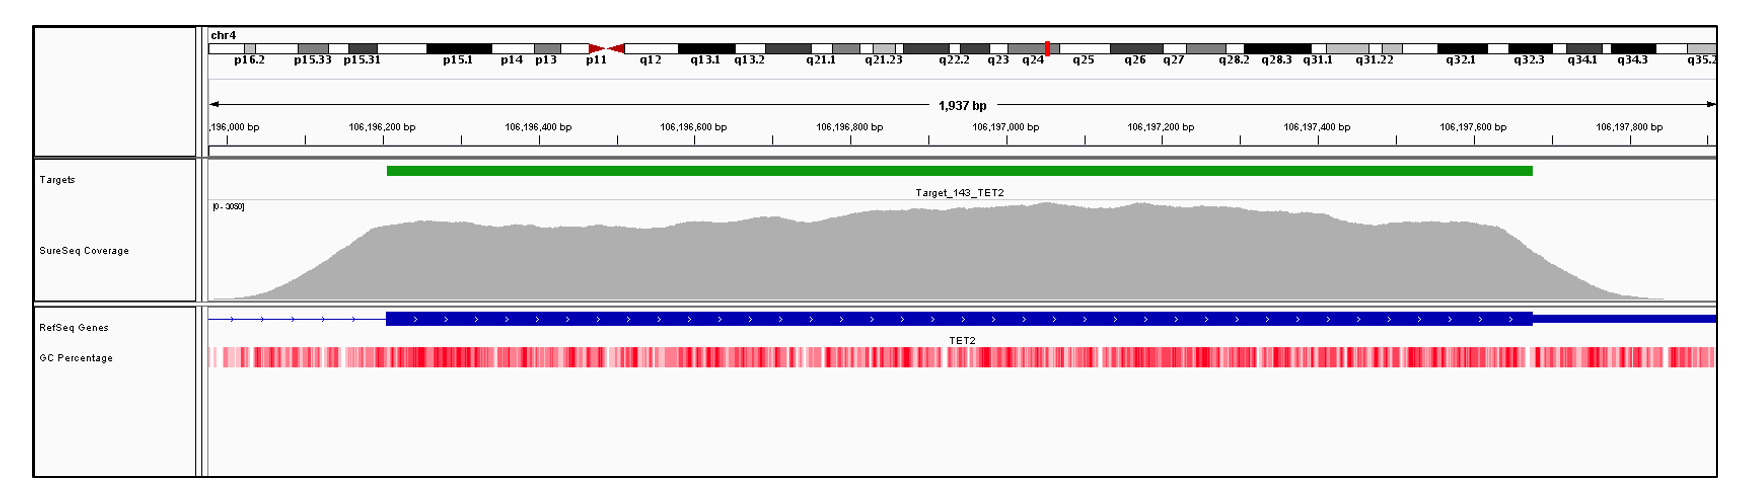 TET2 Exon 11 (hg19 chr4:106196205-106200960). Depth of coverage per base (grey). Targeted region (green). Gene coding region as defined by RefSeq (blue). GC percentage (red). Image